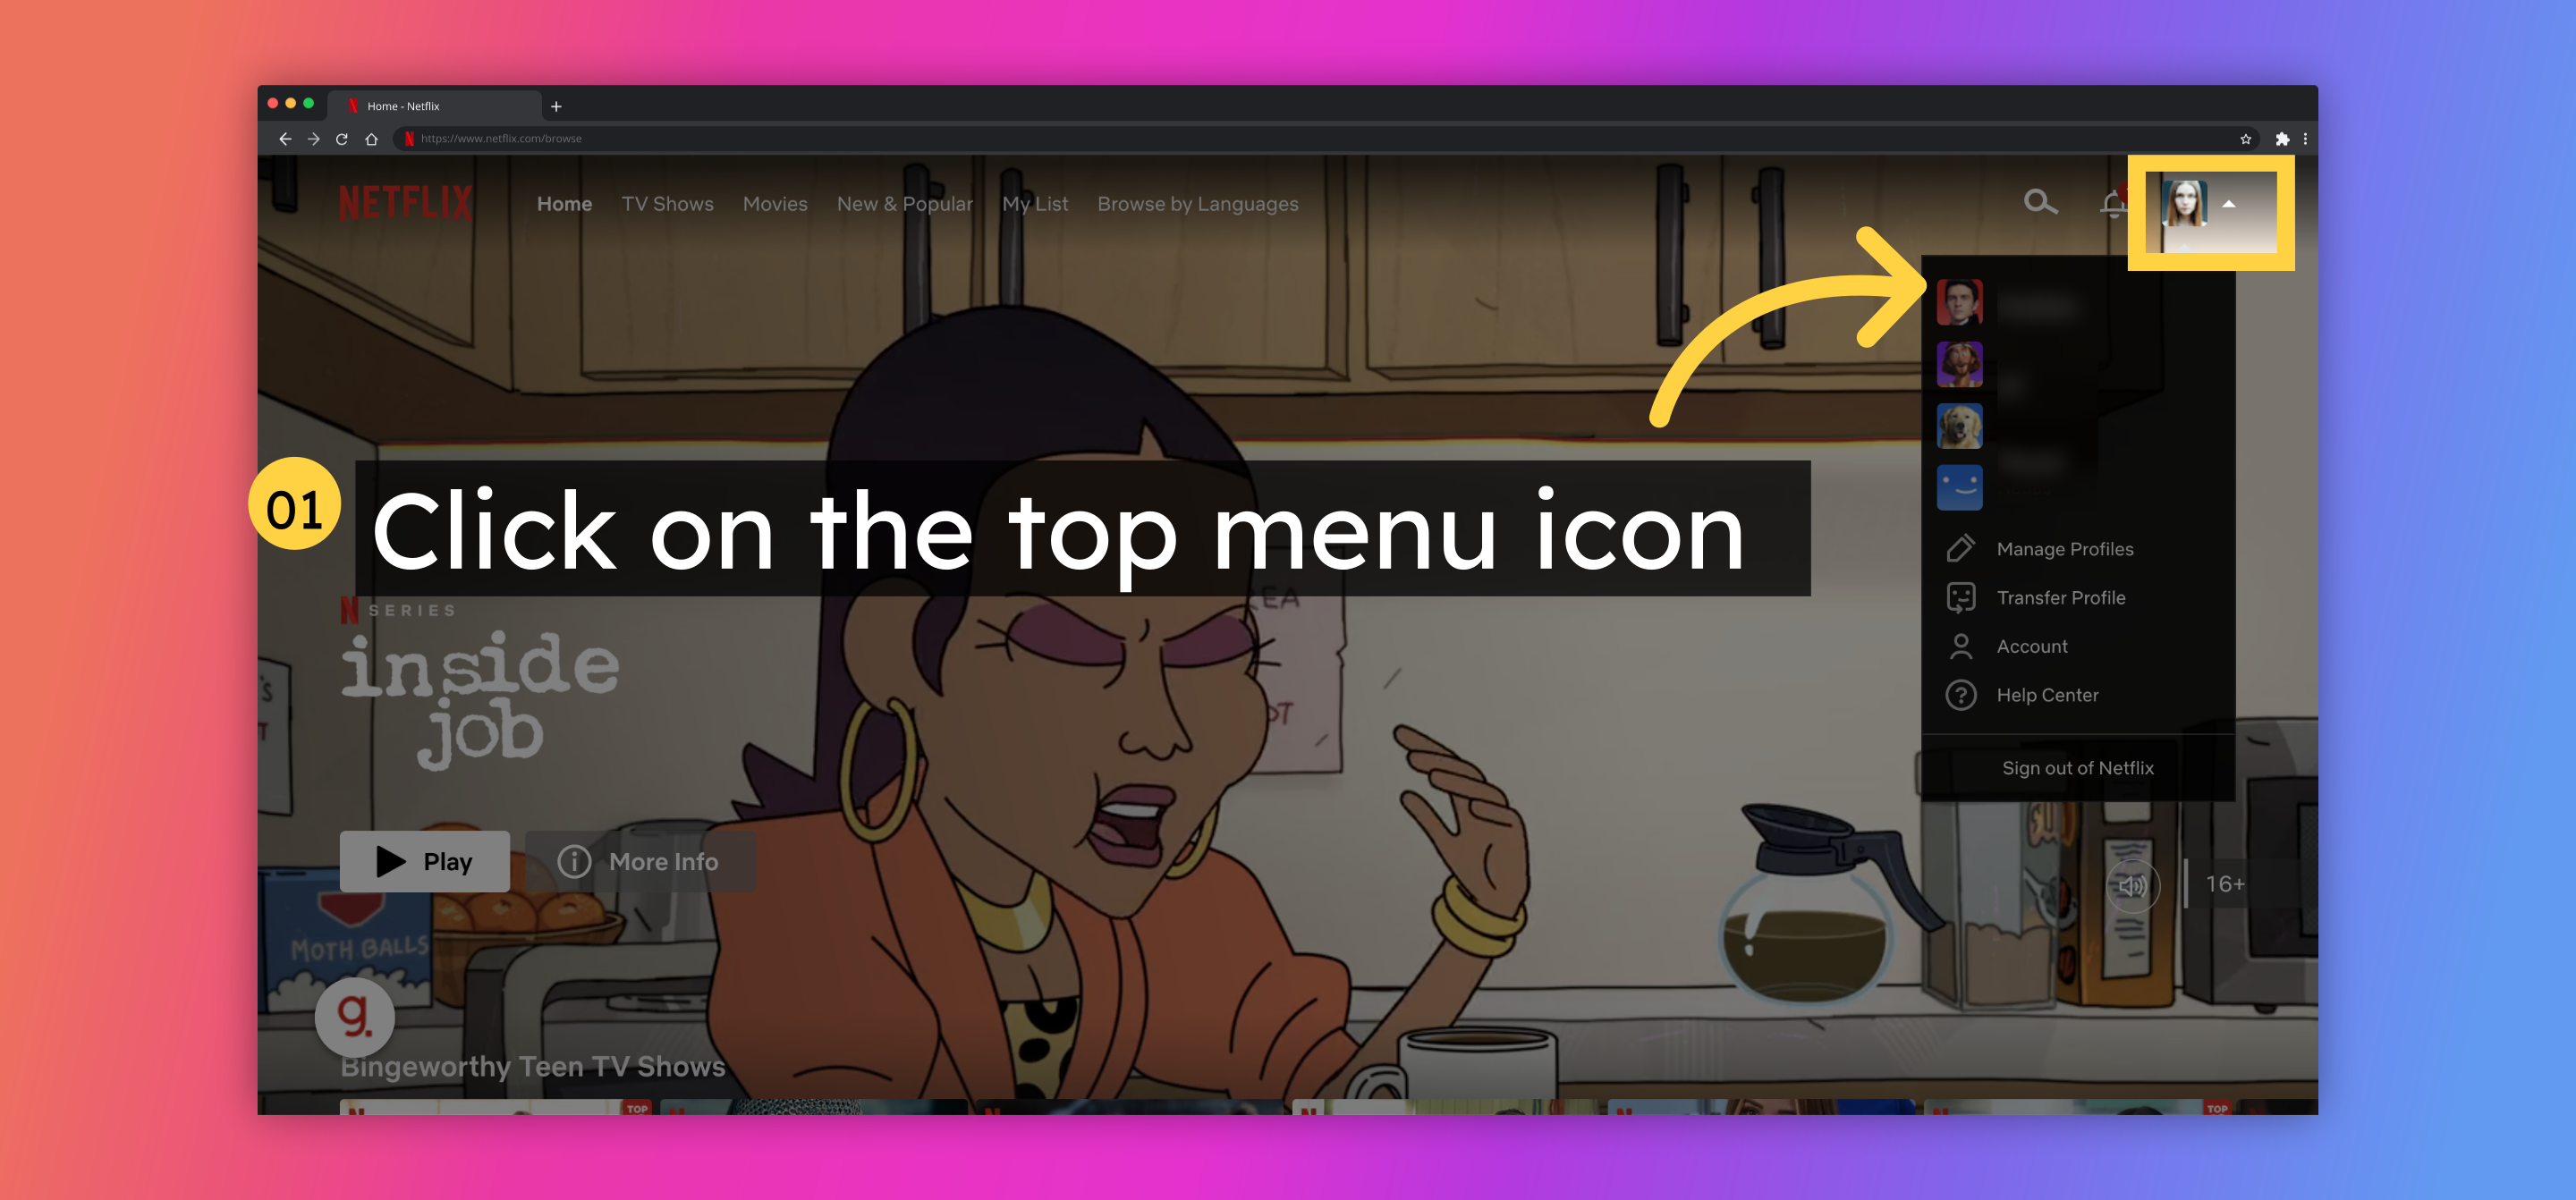 Click on the top menu icon